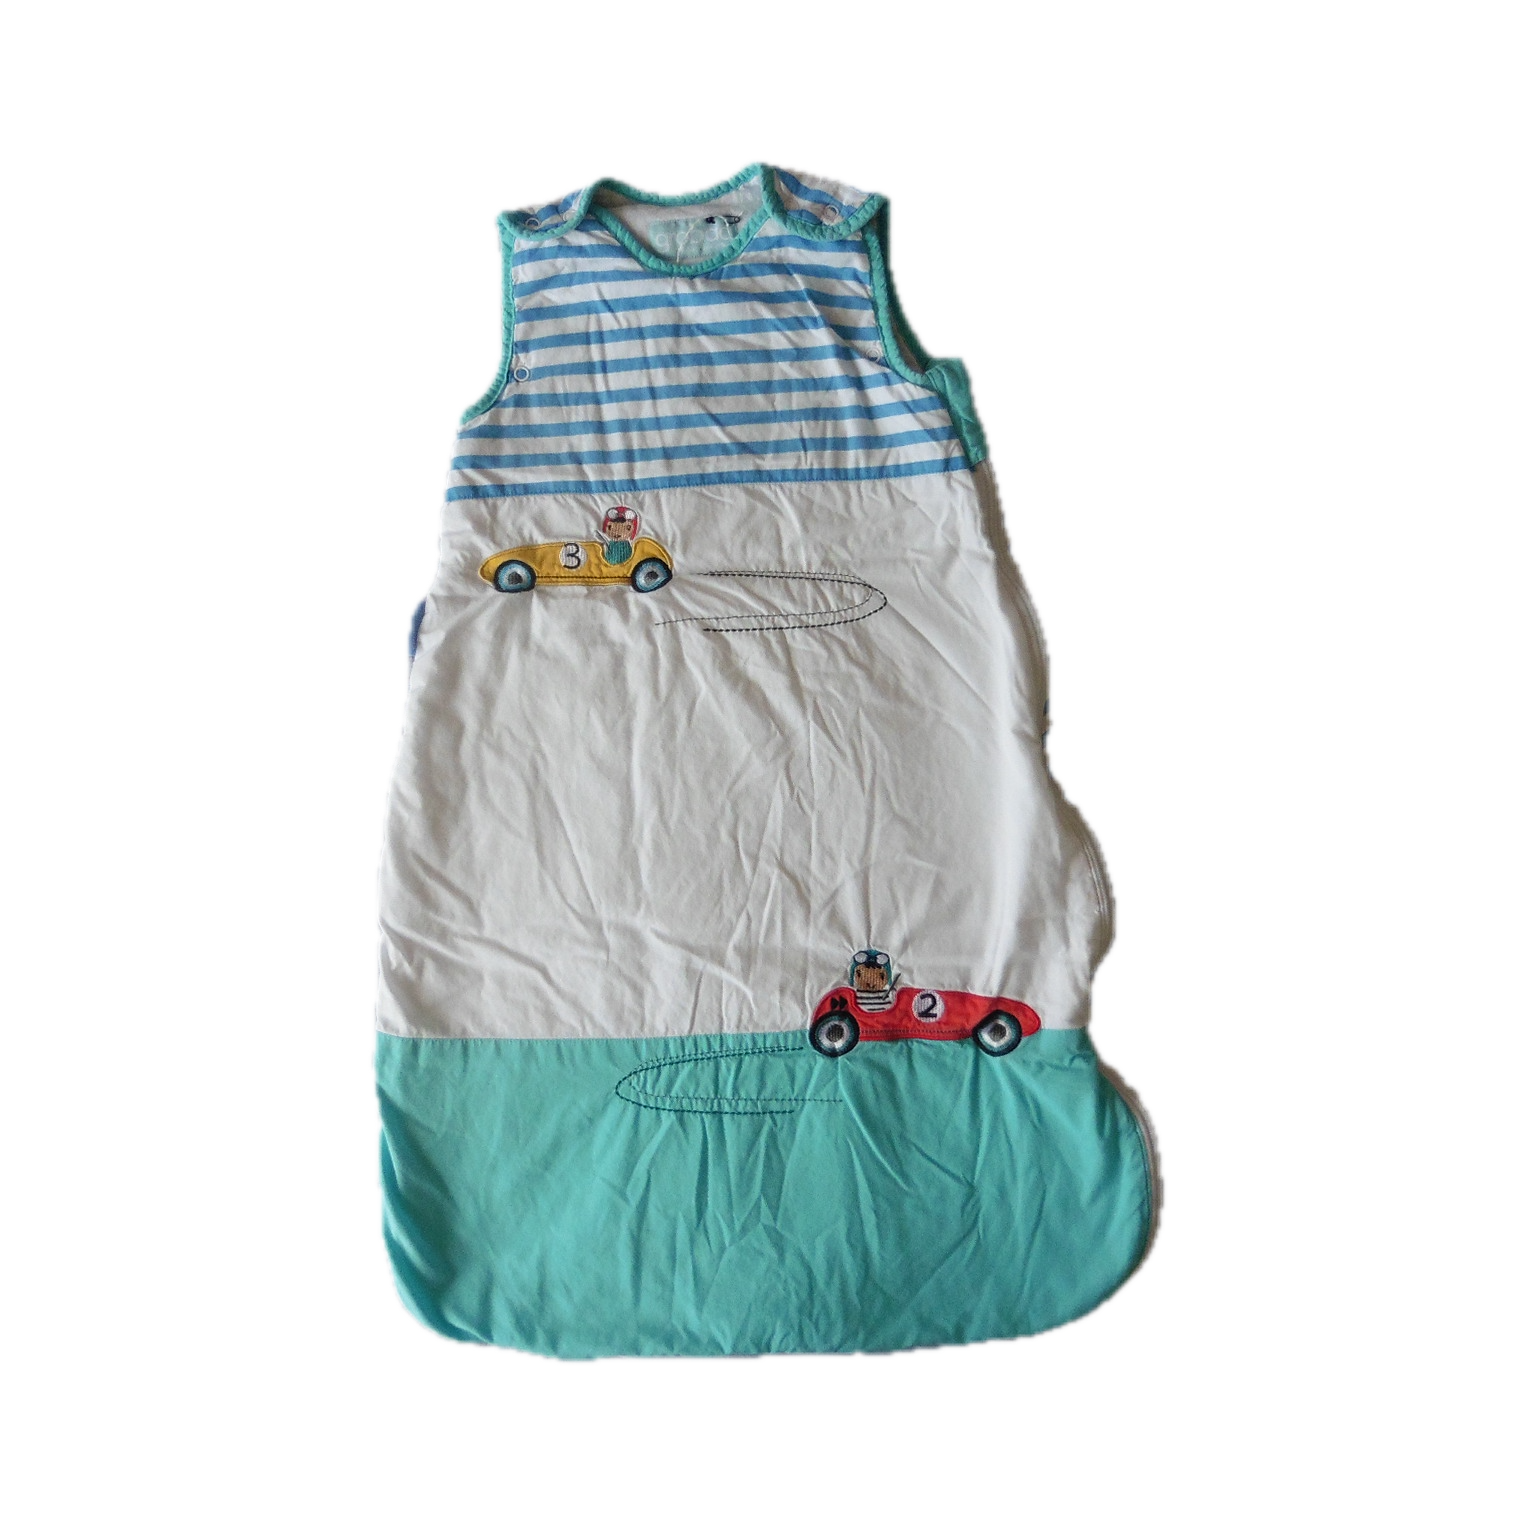 Preloved Grobag White with racing cars 0-6m / 2.5tog